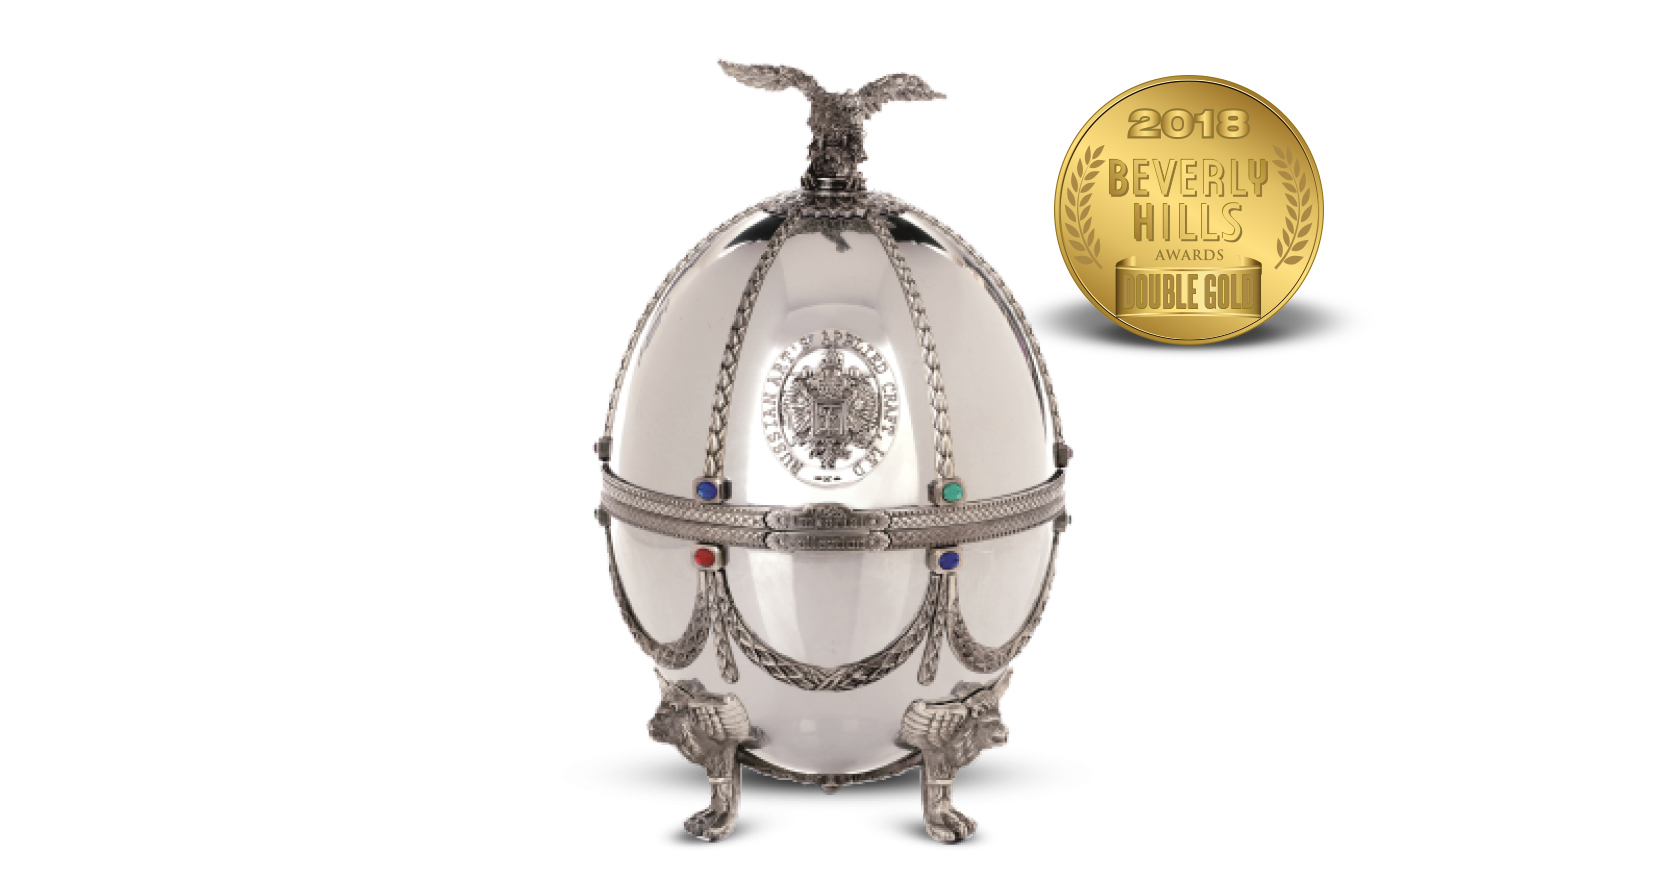 Carafe in Silver Faberge Egg Imperial Collection Super Premium Vodka